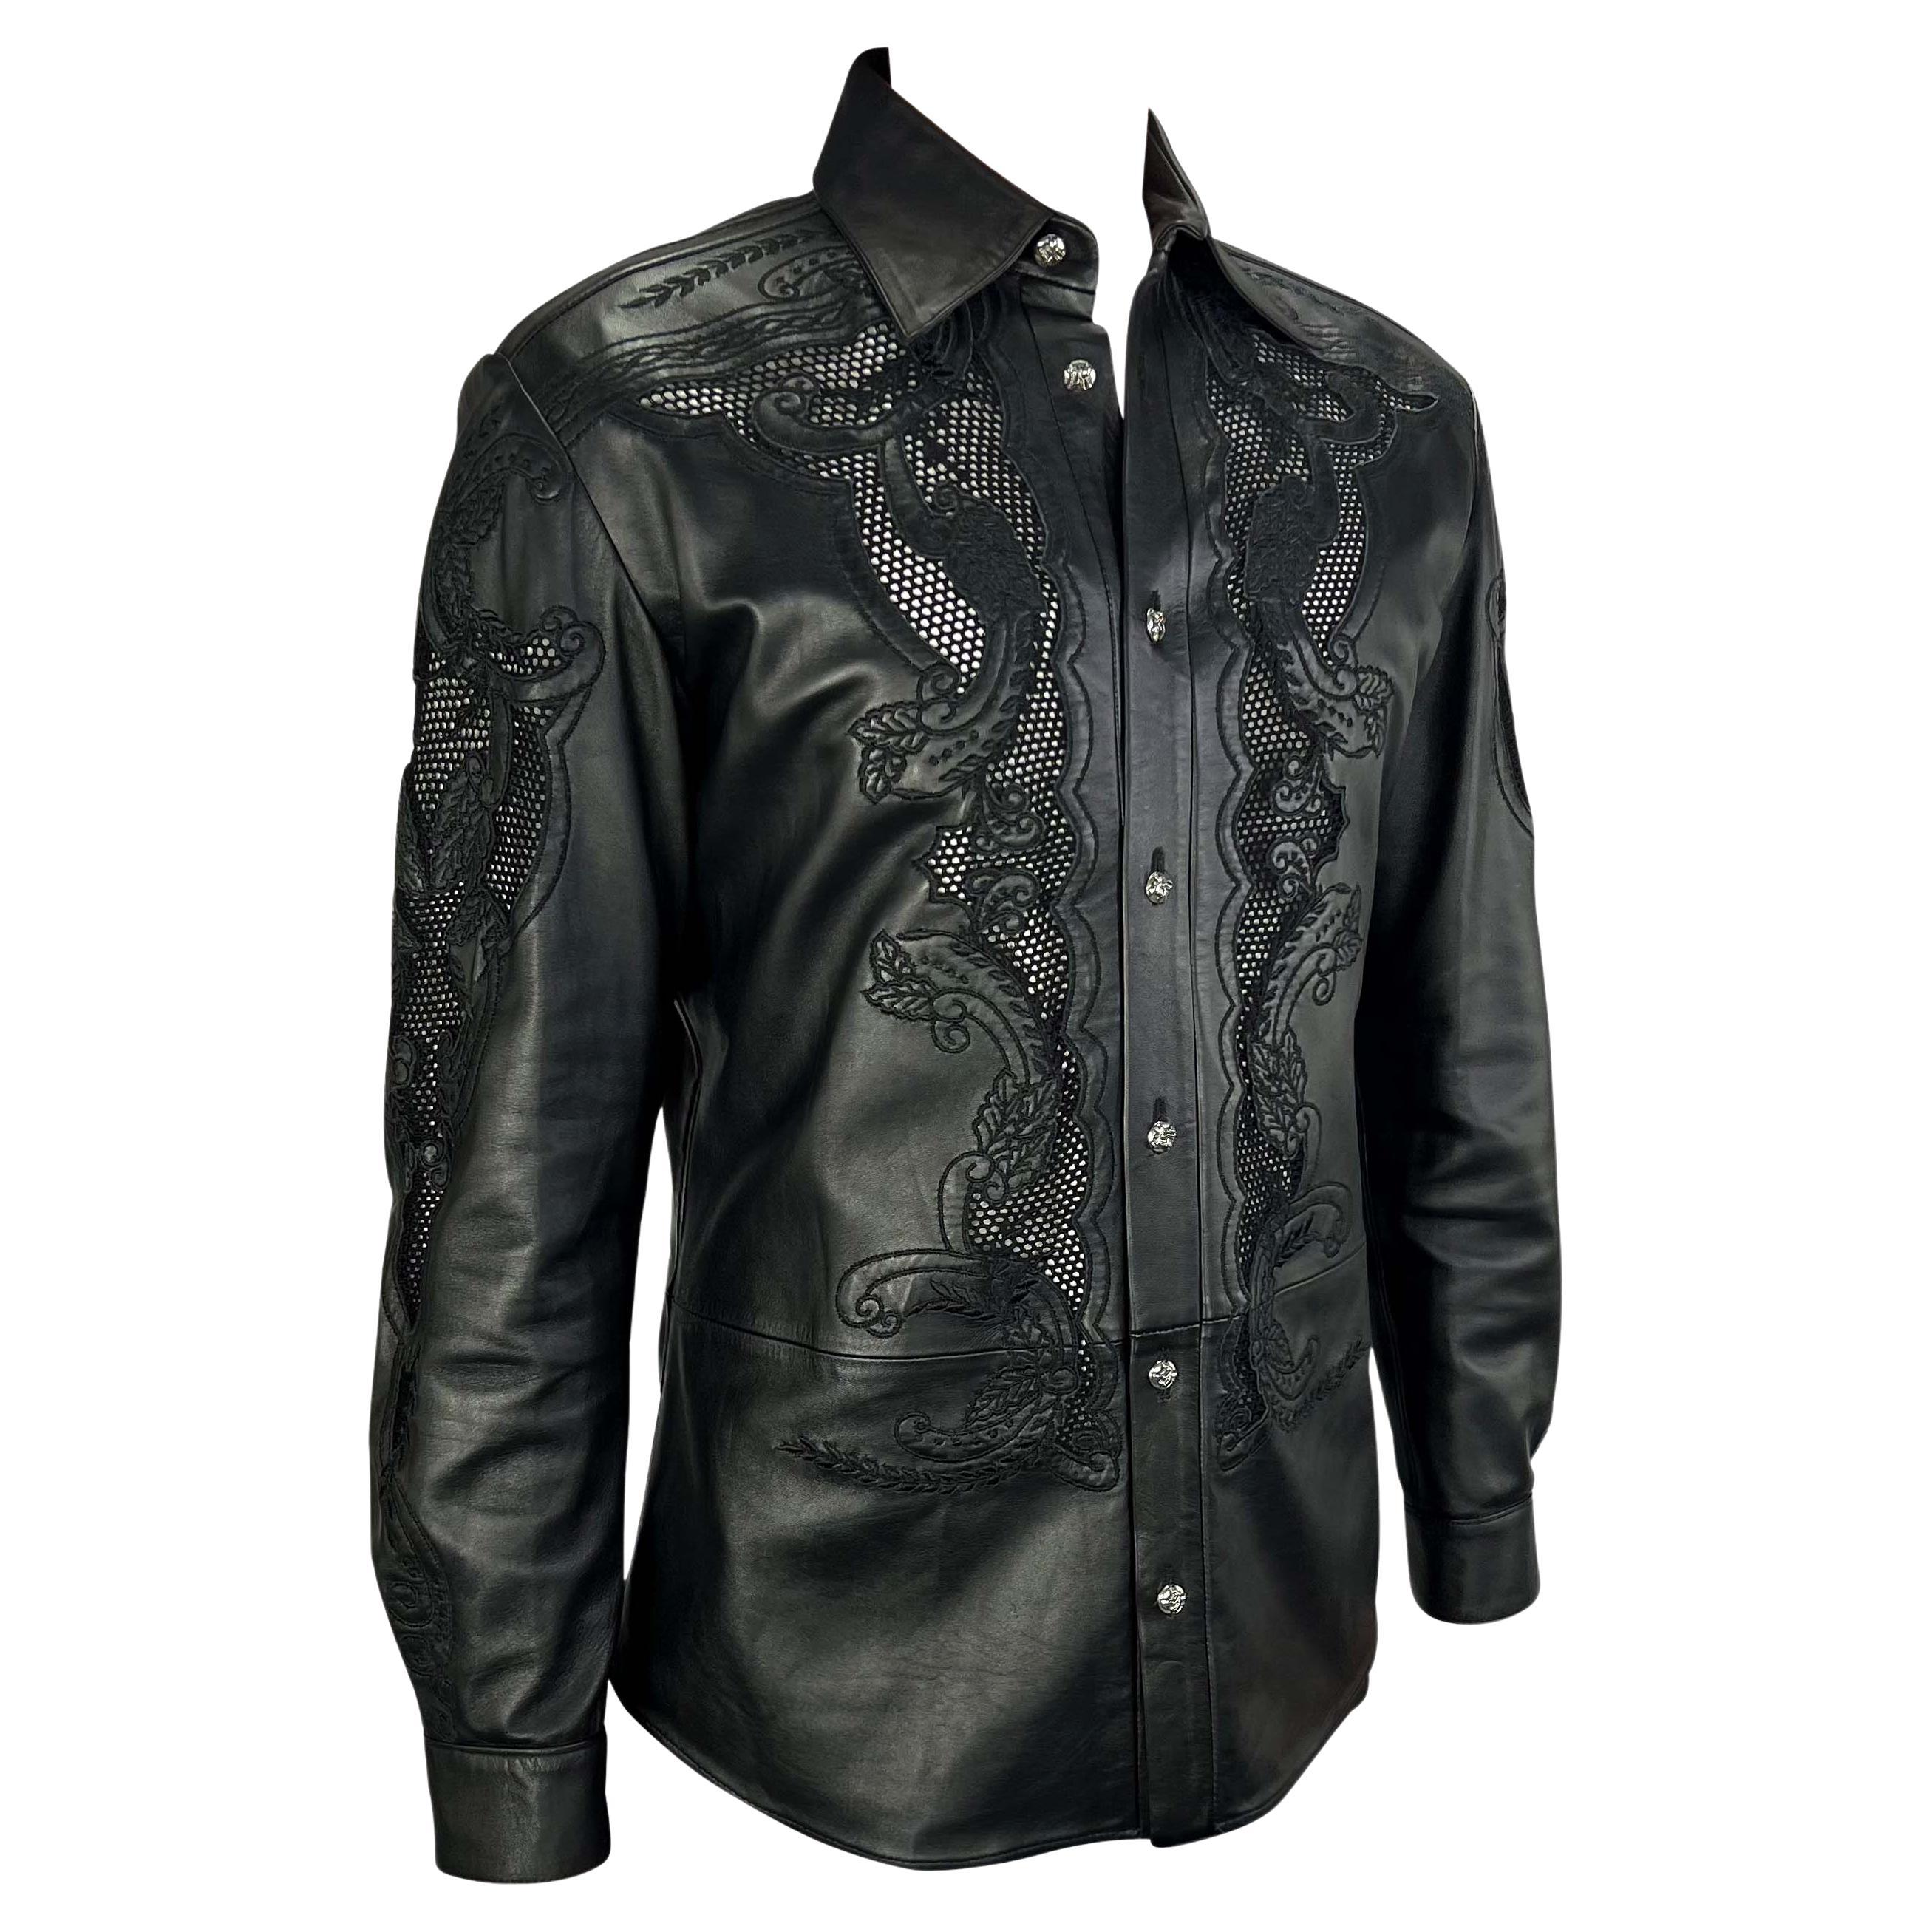 S/S 2003 Gianni Versace by Donatella Men's Runway Black Leather Sheer Lace Shirt 3